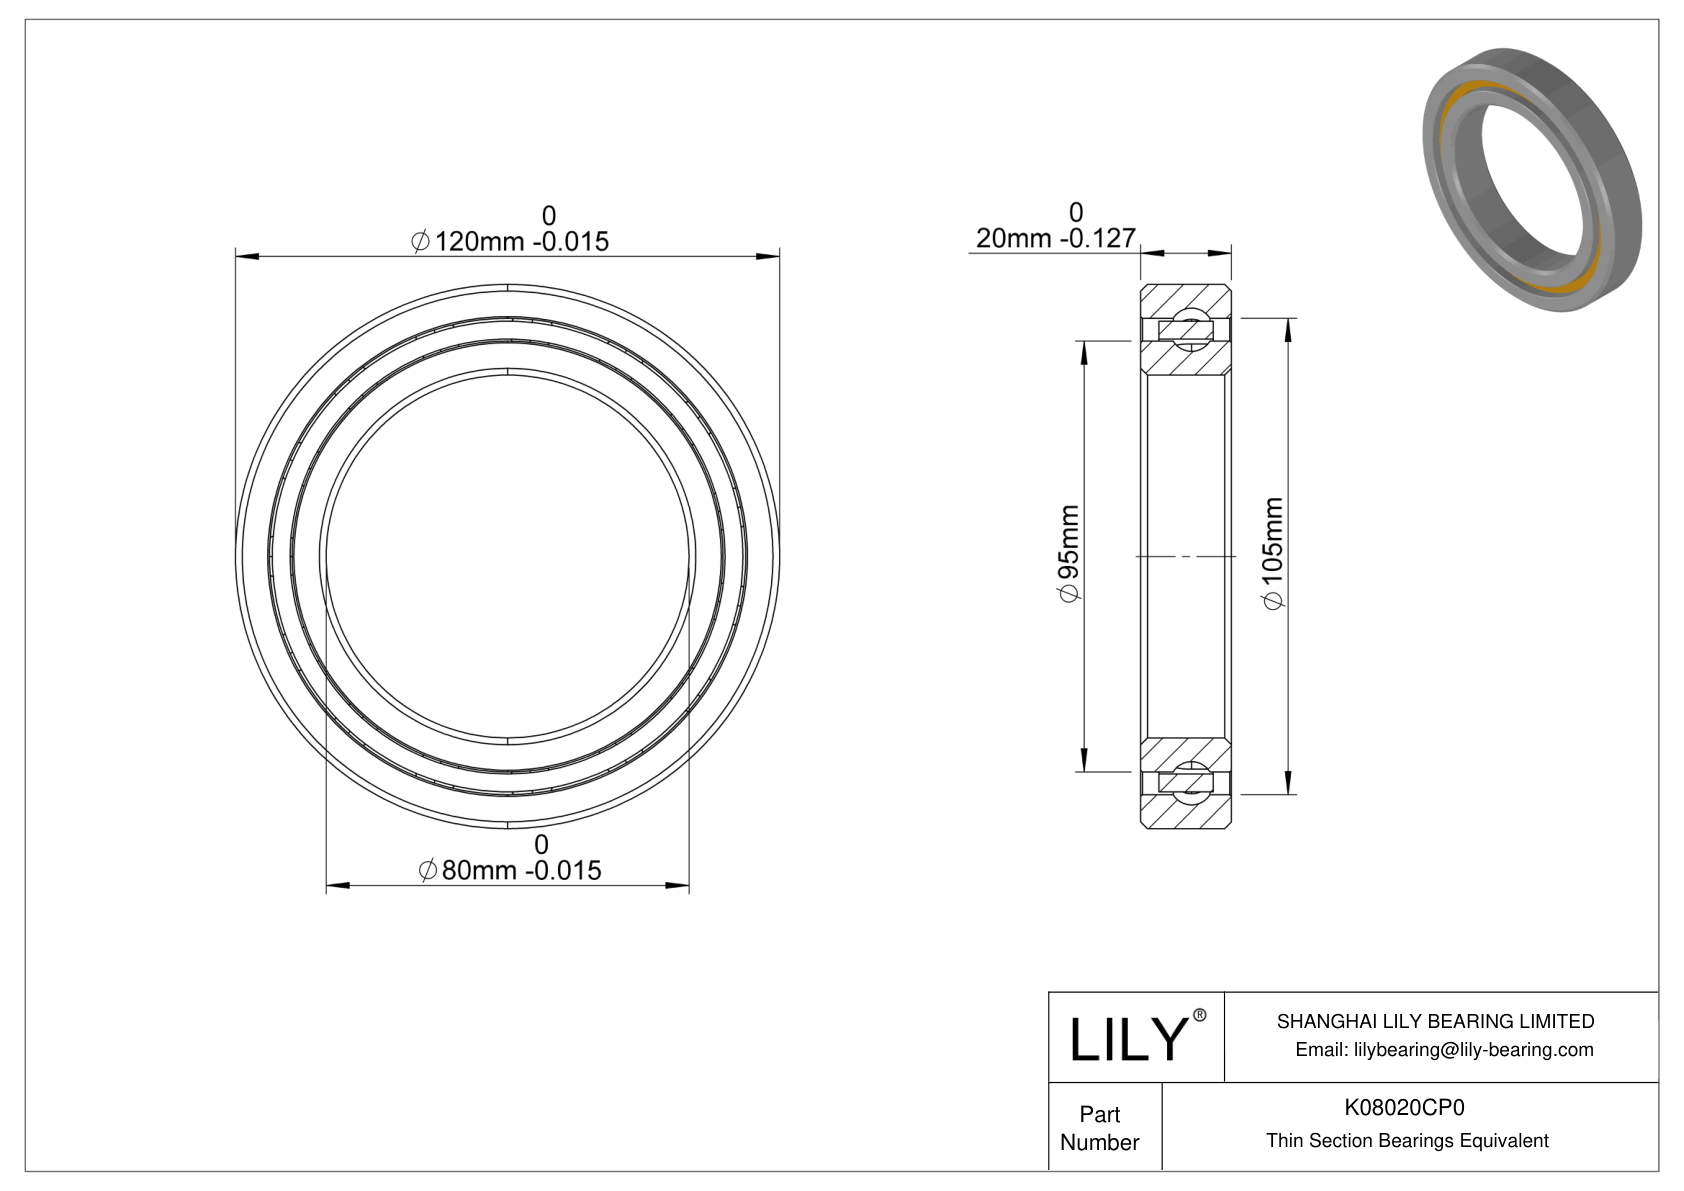 K08020CP0 Constant Section (CS) Bearings cad drawing